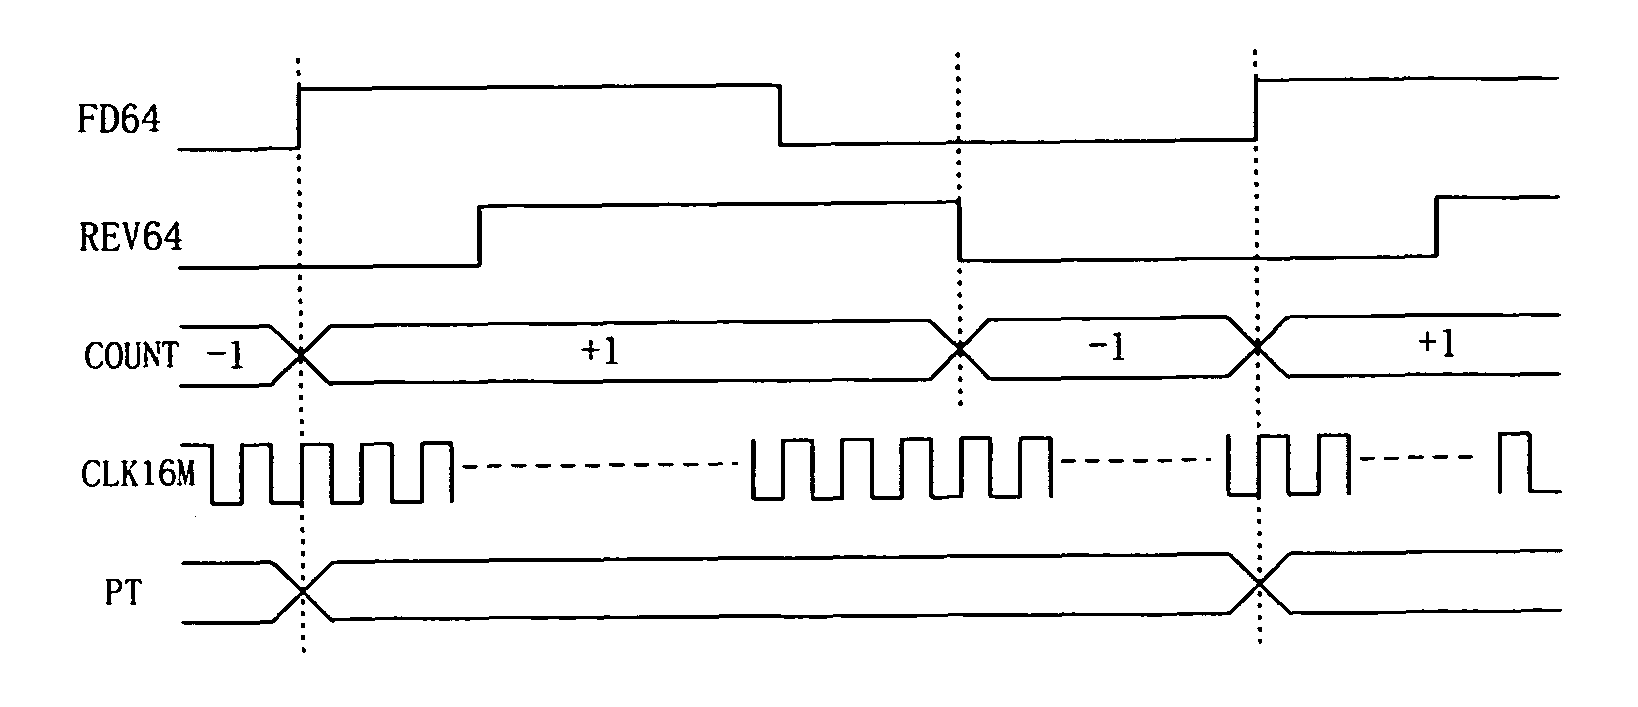 Method and apparatus for de-jittering a clock signal